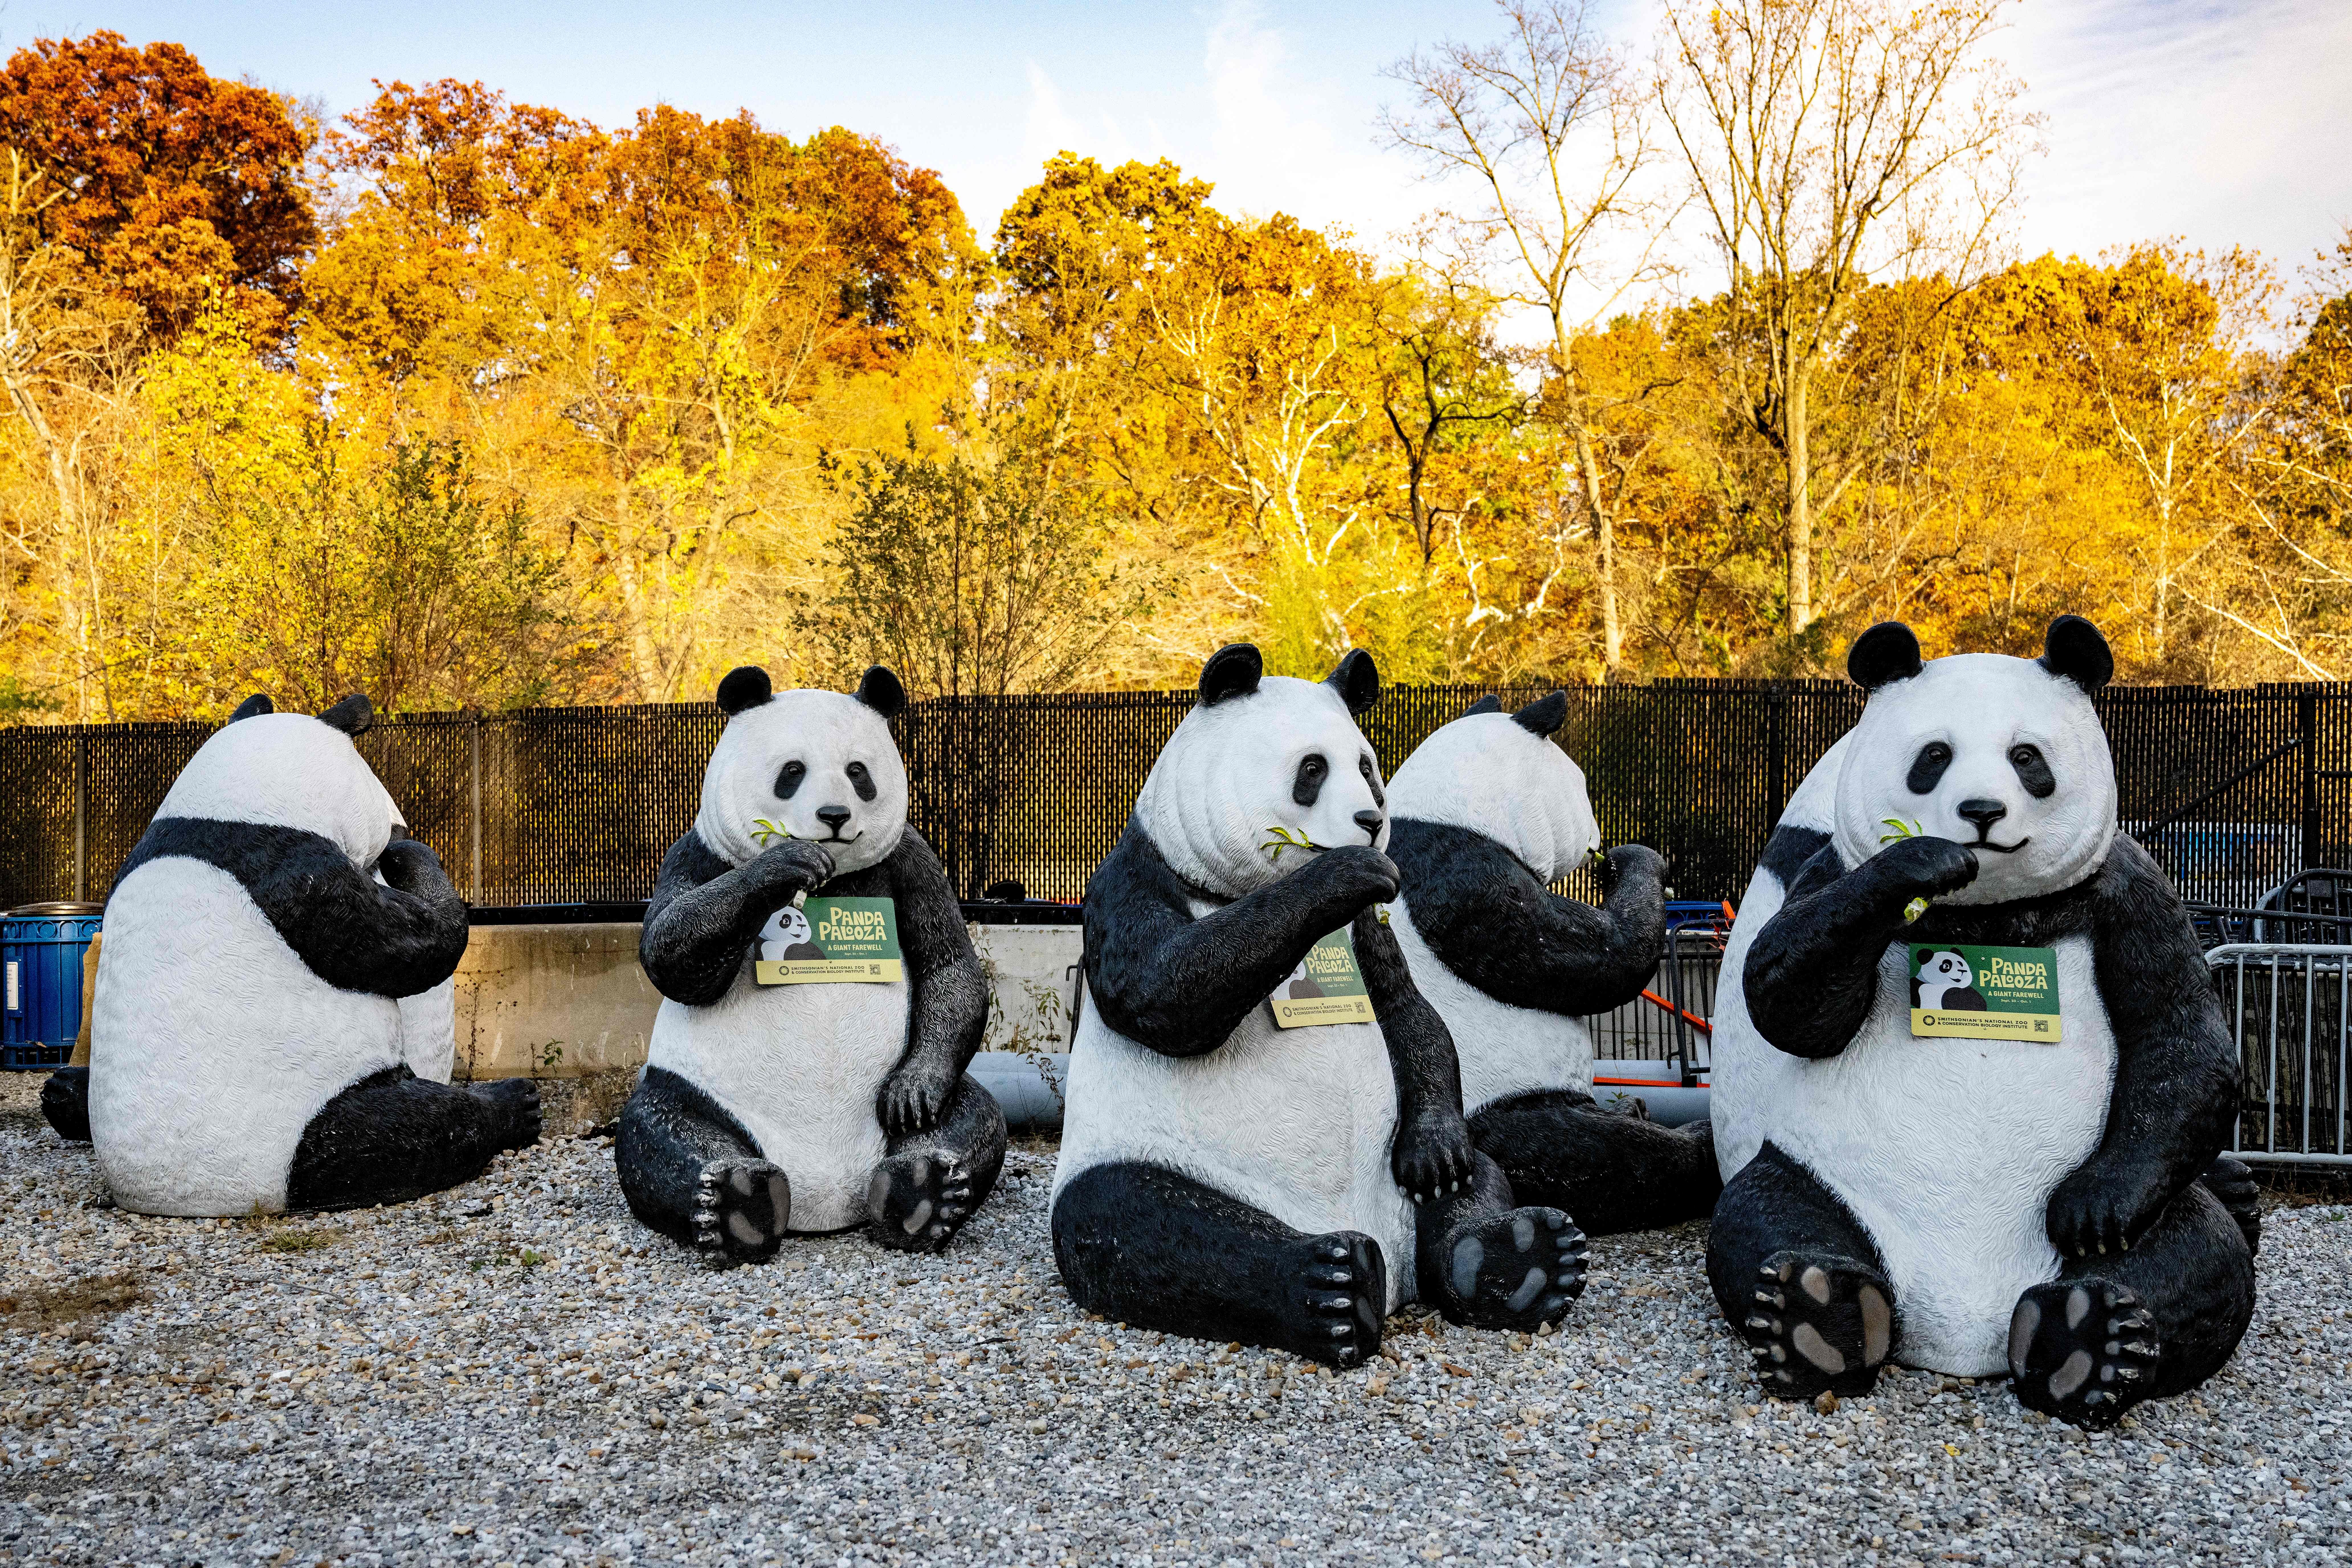 Giant Panda statues are stored in a back parking lot at the Smithsonian National Zoo in Washington, DC, on November 7, 2023. All three of the zoo's pandas are leaving for China by the end of the year, bringing at least a temporary end to a decades-old connection between the cuddly animal and the US capital. And while the pandas' departure had been expected due to contractual obligations, many can't help but see the shift as reflective of the growing strains between Beijing and Washington. (Photo by Jim WATSON / AFP) (Photo by JIM WATSON/AFP via Getty Images)